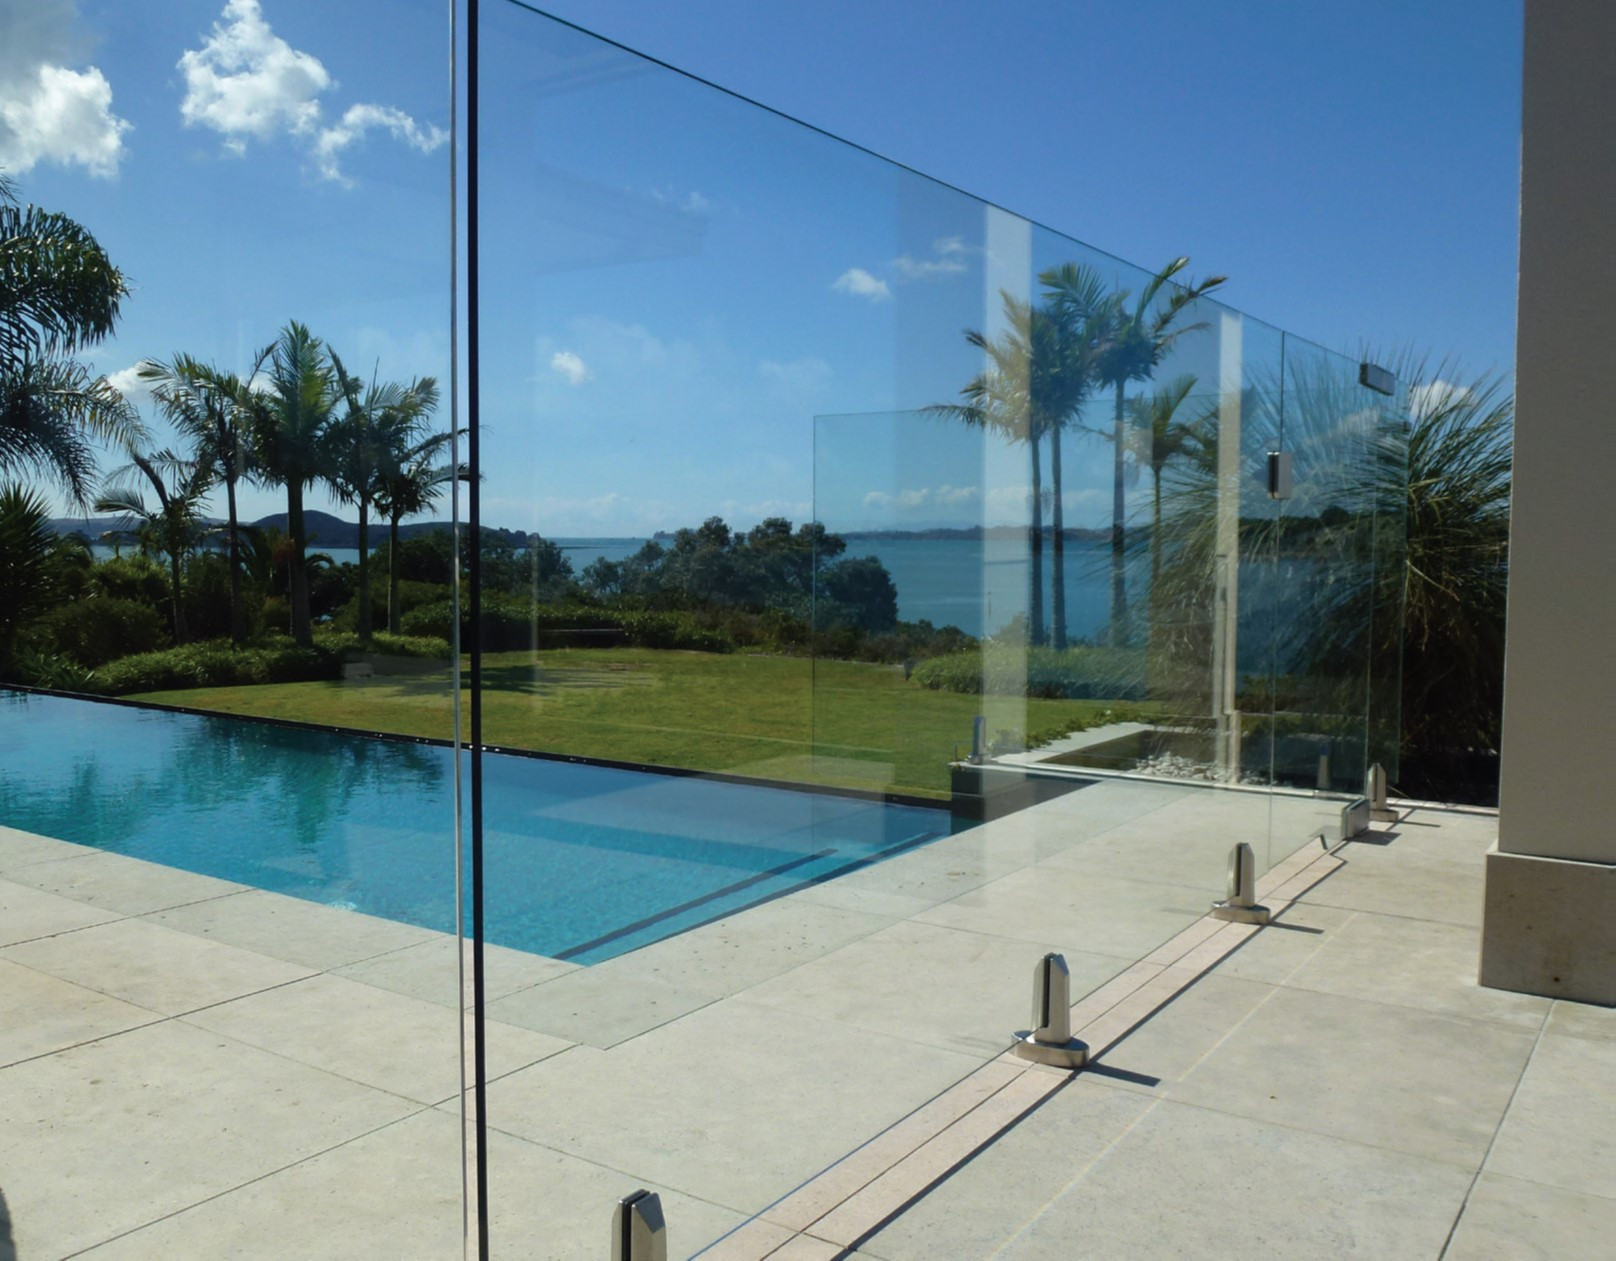 Glass balustrade overlooking swimming pool and ocean view